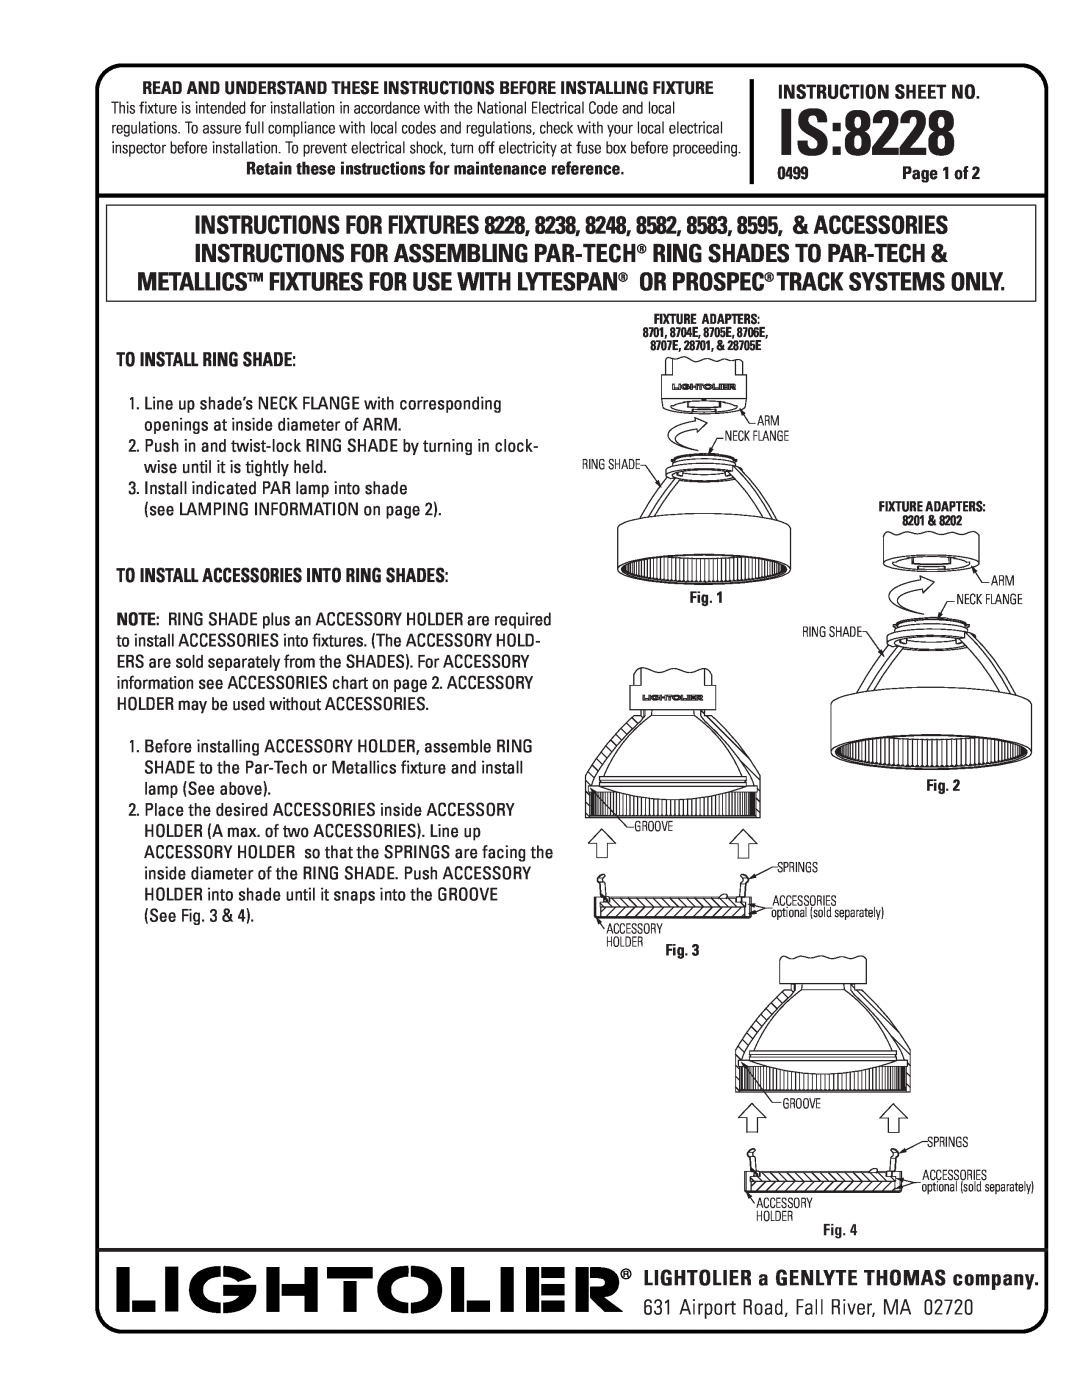 Lightolier 8228 instruction sheet Is, Instruction Sheet No, To Install Ring Shade, To Install Accessories Into Ring Shades 